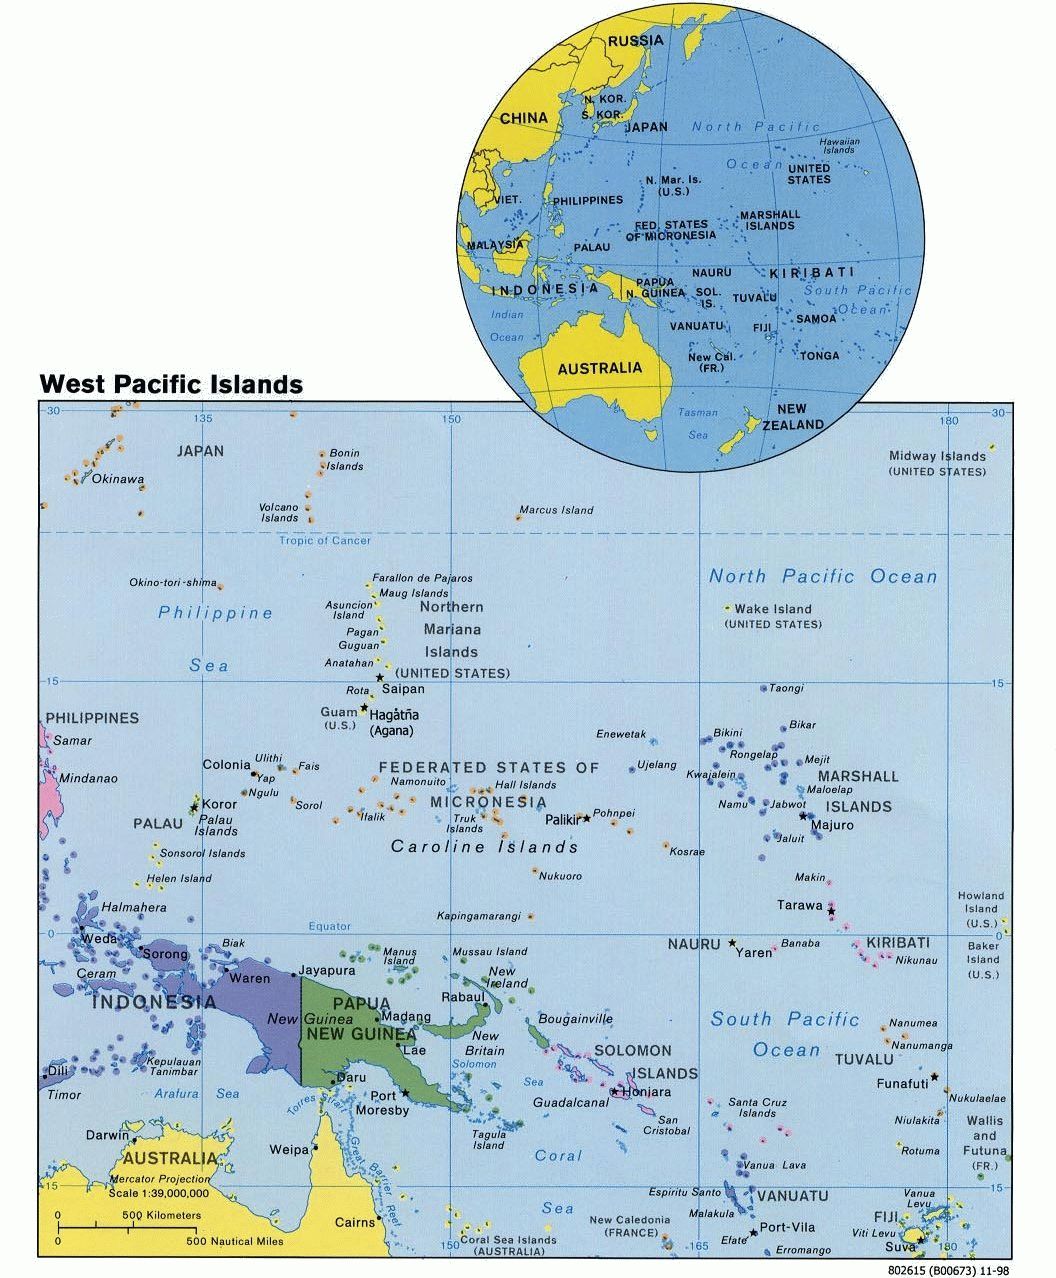 Map of the West Pacific Islands (Political), 1998. Courtesy of, The World Factbook (http://cia.gov/cia/publications/factbook) or CIA Maps and Publications Released to the Public (http://www.cia.gov/cia/publications/mapspub), Central Intelligence Agency (CIA), Government of the United States of America (USA); and the Perry-Castaeda Map Collection (http://www.lib.utexas.edu/maps), Perry-Castaeda Library, The General Libraries, University of Texas at Austin, Austin, Texas, USA.